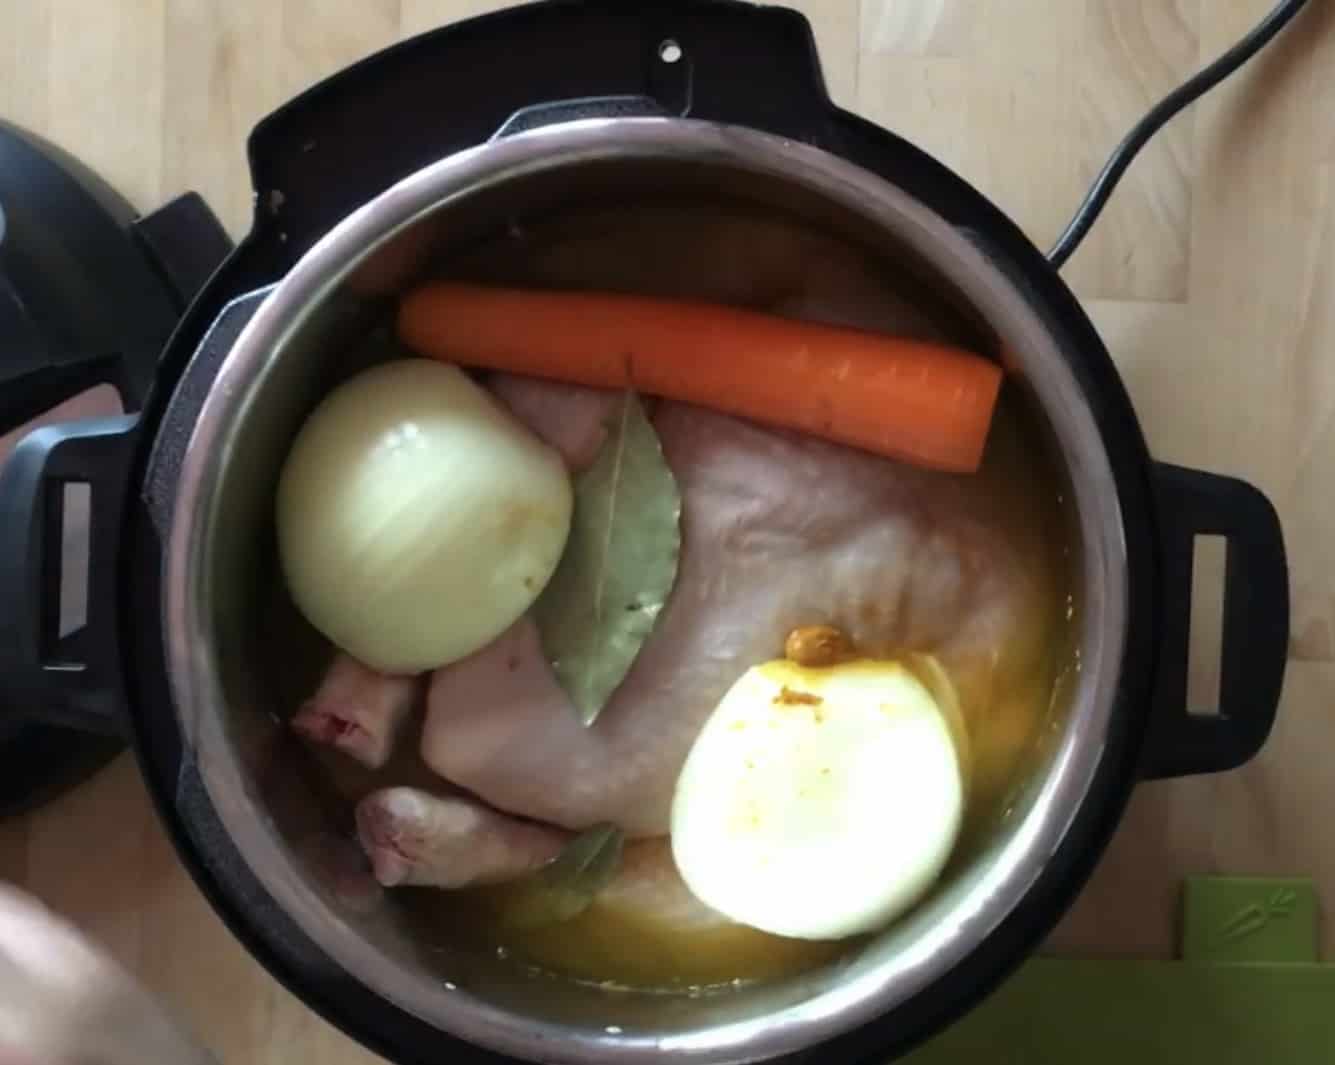 Instant Pot Whole Chicken Stock